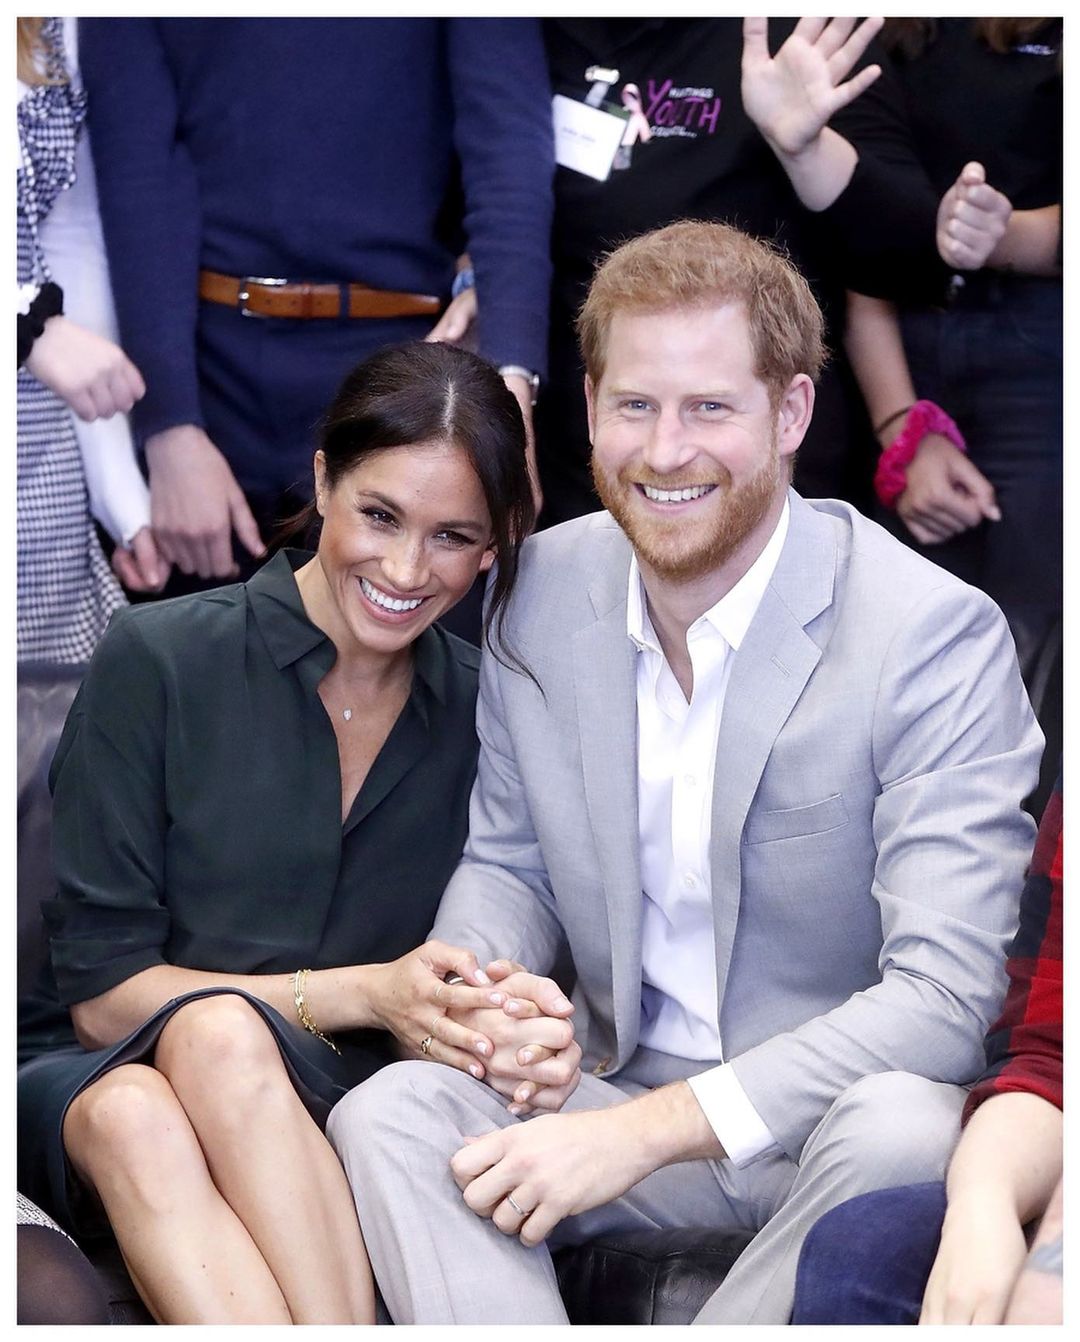 prince-harry-meghan-markle-taunted-harassed-by-drones-la-los-angeles-home-trump-social-media-protection-order-twitter-premier-league-june-17-return-latest-news-global-world-stories-thursday-may-2020-style-rave